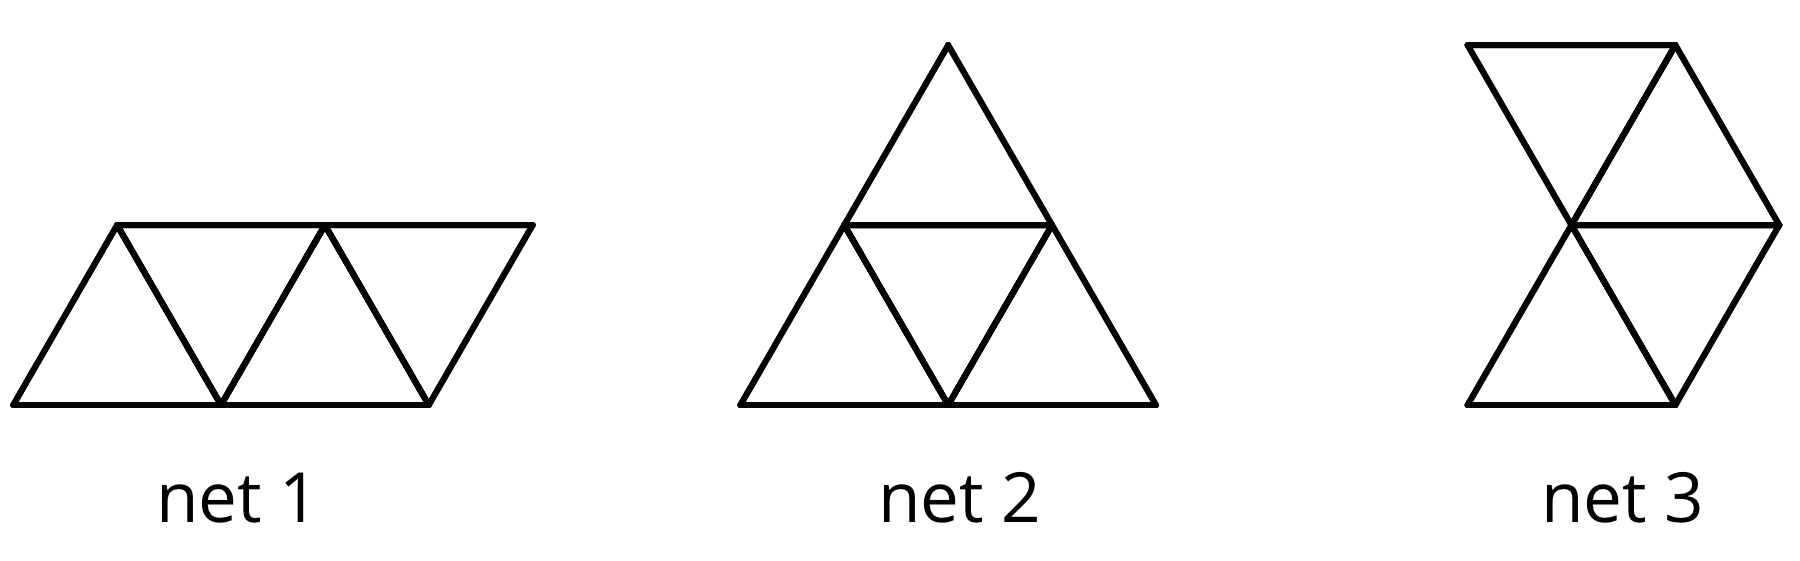 Three figures labeled net1, net 2, and net 3. Net 1 has four small triangles arranged horizontally to create a parallelogram, net two has four small triangles arranged to make a larger triangle, and net 3 has two four small triangles which all meet at their vertices.